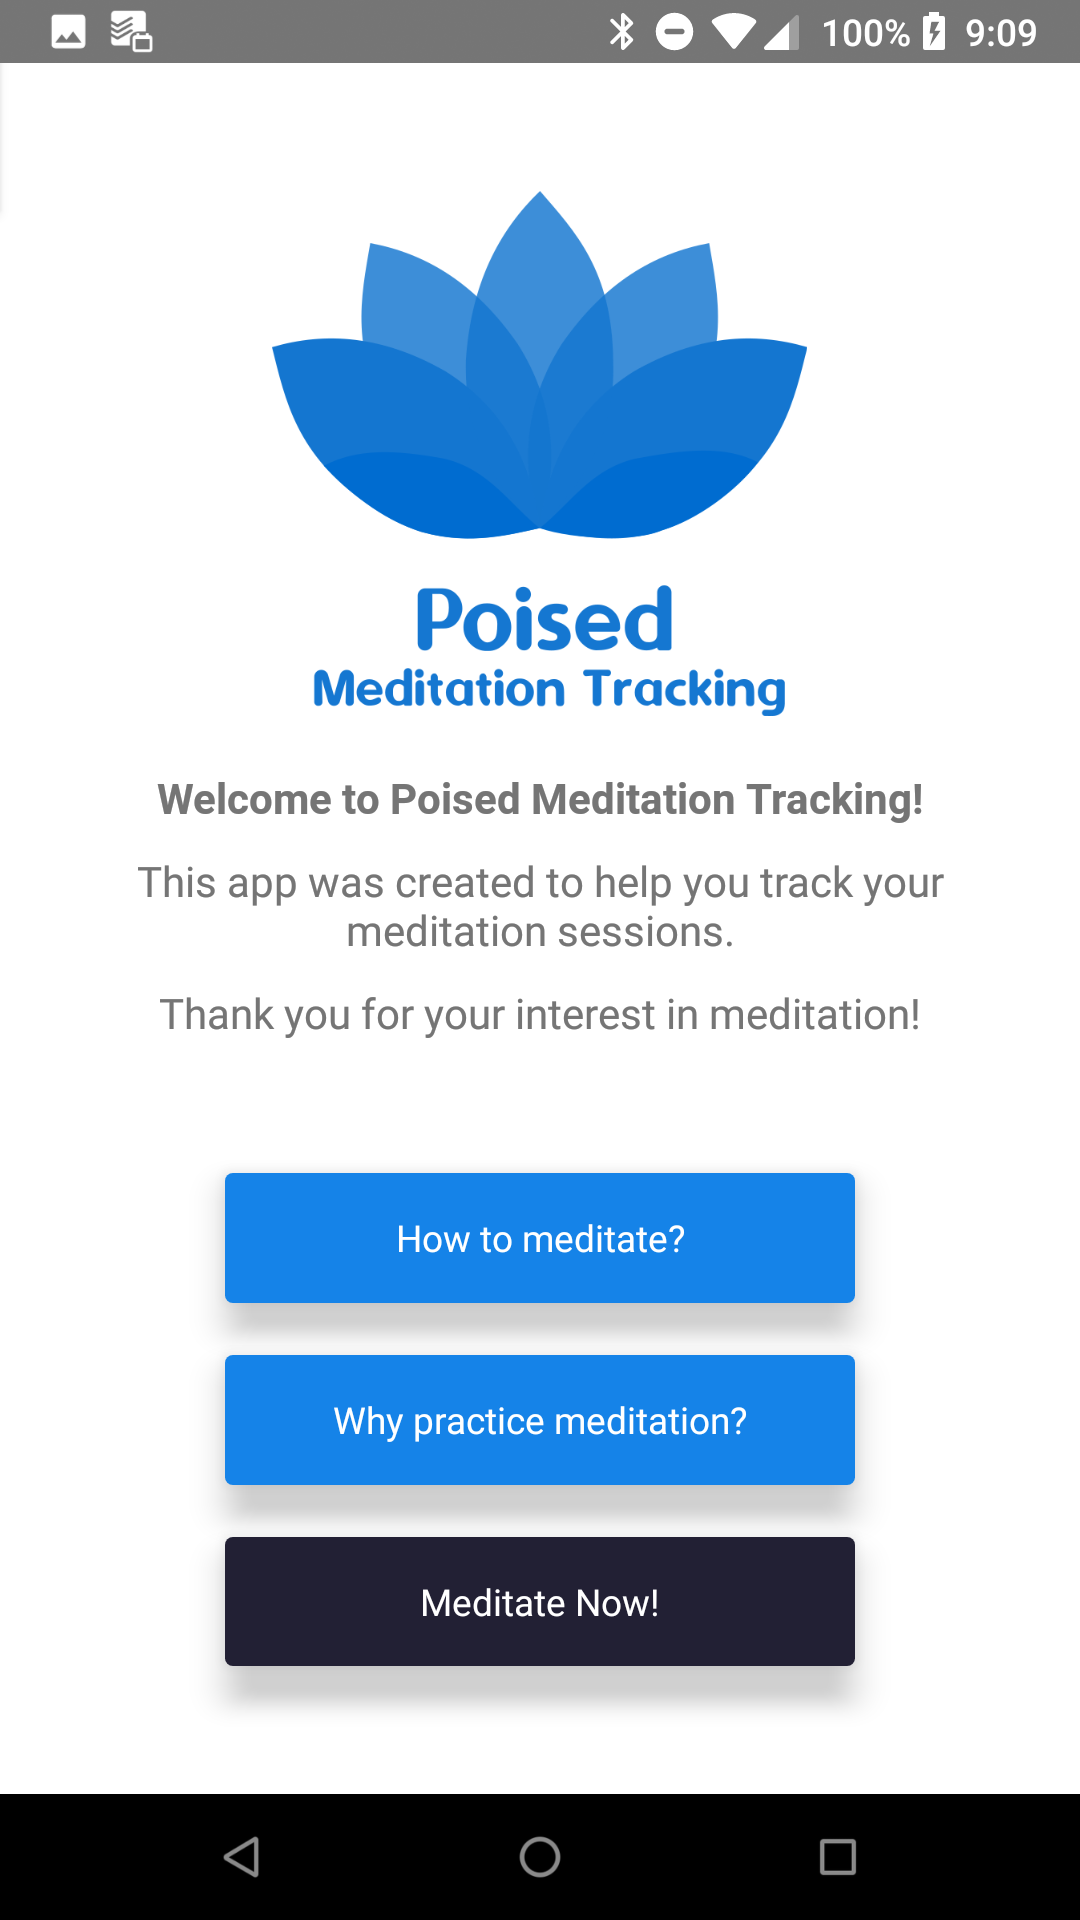 Learn how to meditate UI